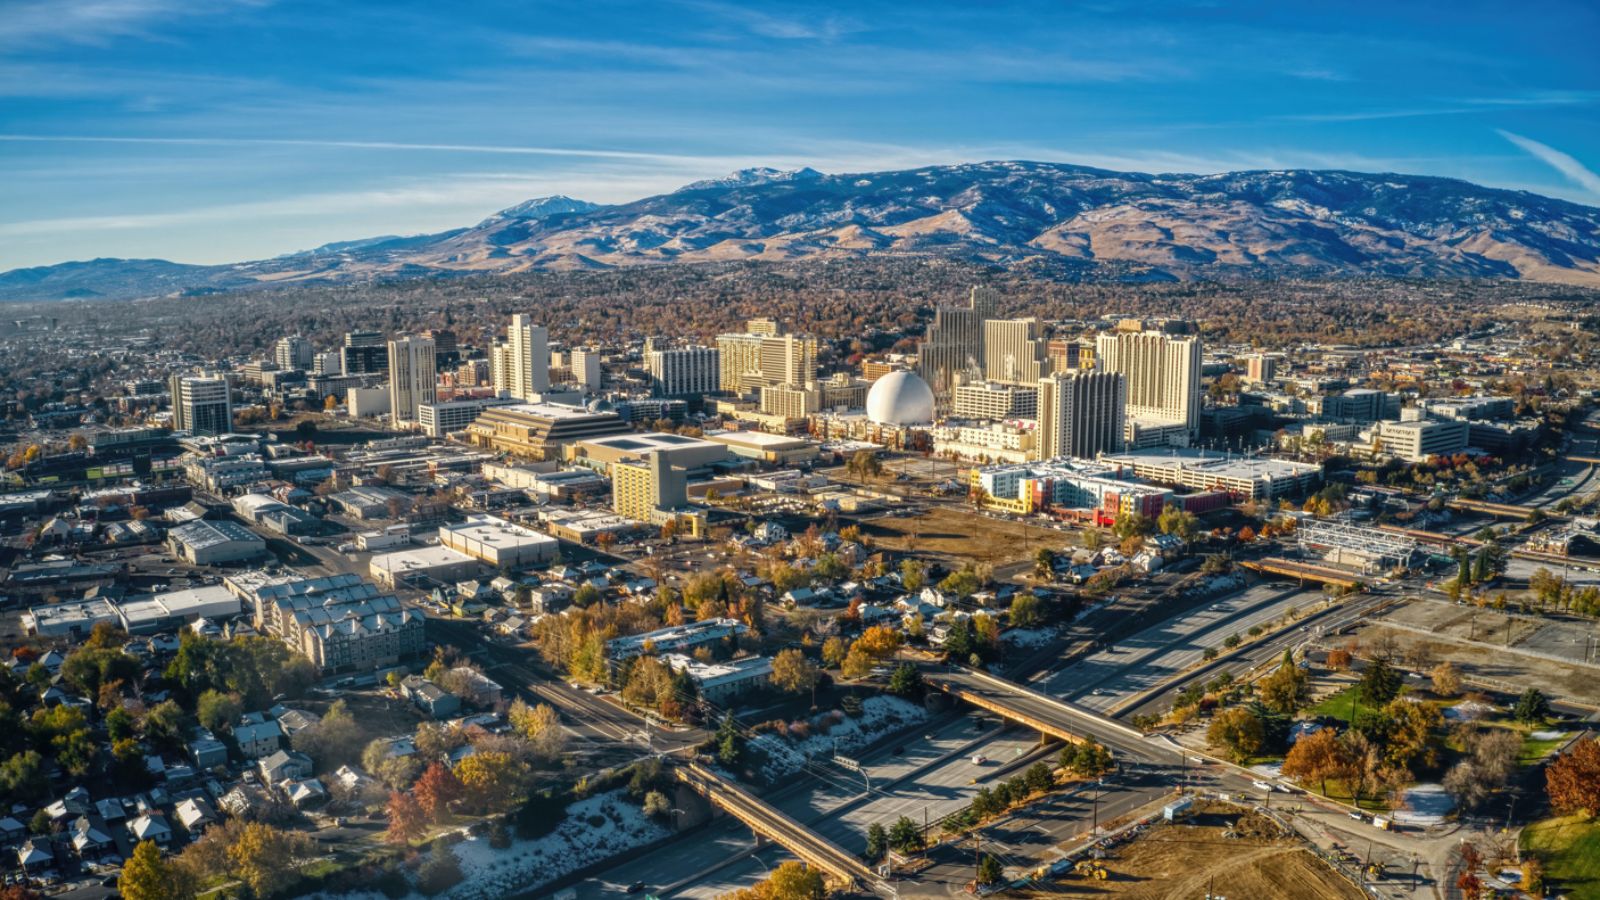 <p><span>Well known for its casinos but also other marvels. Known as the “</span><i><span>The Biggest Little City in the World</span></i><span>,” Reno serves as a gateway to the beauty of Lake Tahoe and boasts a lively Riverwalk area where you can find parks, pubs, and boutiques. This Forbes article has more: The ‘</span><a href="https://www.forbes.com/sites/kaitlynmcinnis/2020/06/25/the-biggest-little-city-in-the-world-was-just-named-the-best-small-city-in-america/?sh=3499ac842133"><span>Biggest Little City In The World’ Was Just Named The Best Small City In America</span></a><span>.  The Nevada Museum of Art is also worth visiting for its collection of Western art and photography.</span></p>